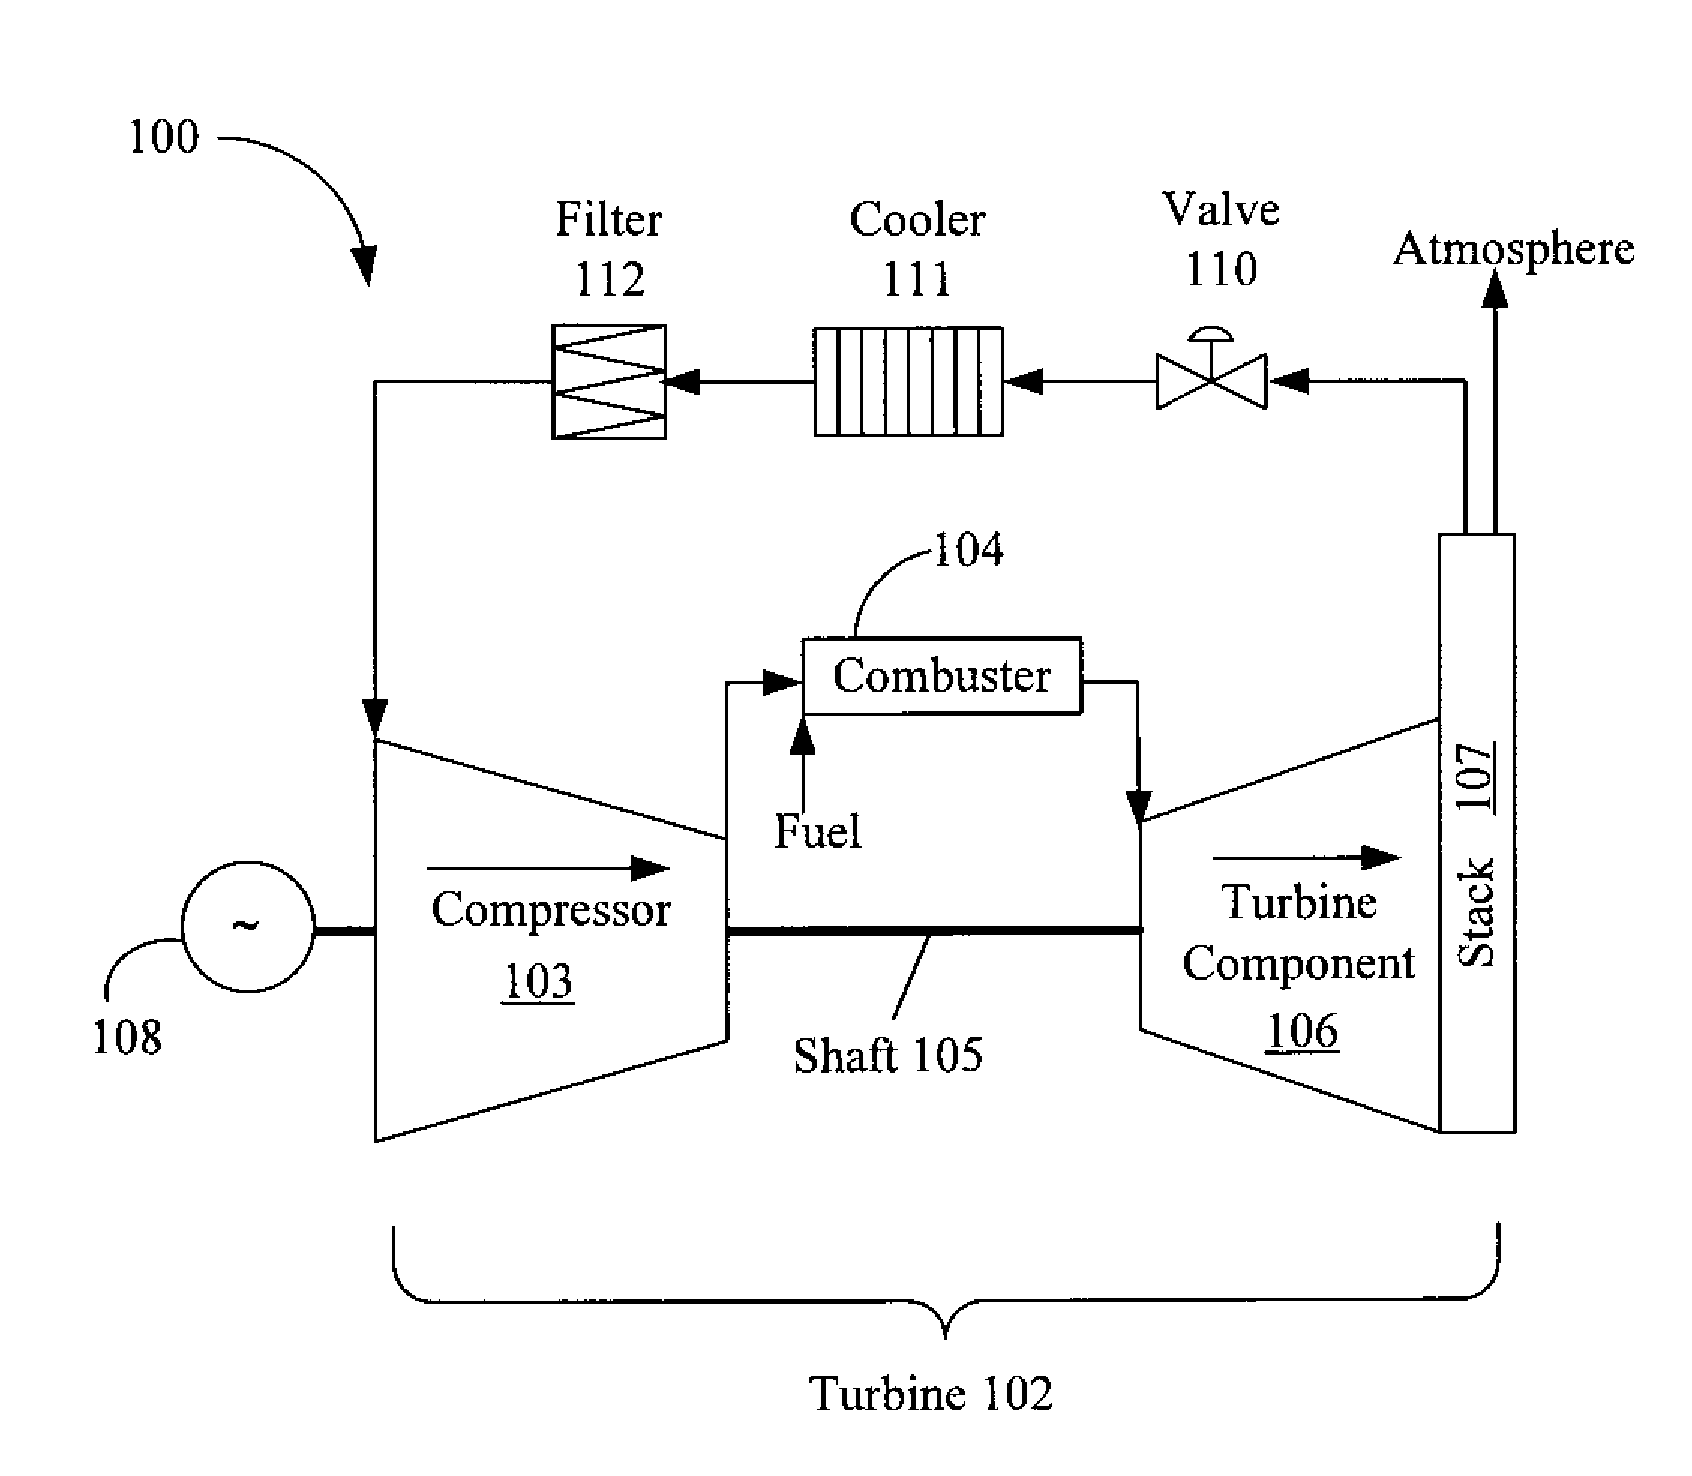 Systems and Methods for Exhaust Gas Recirculation (EGR) for Turbine Engines